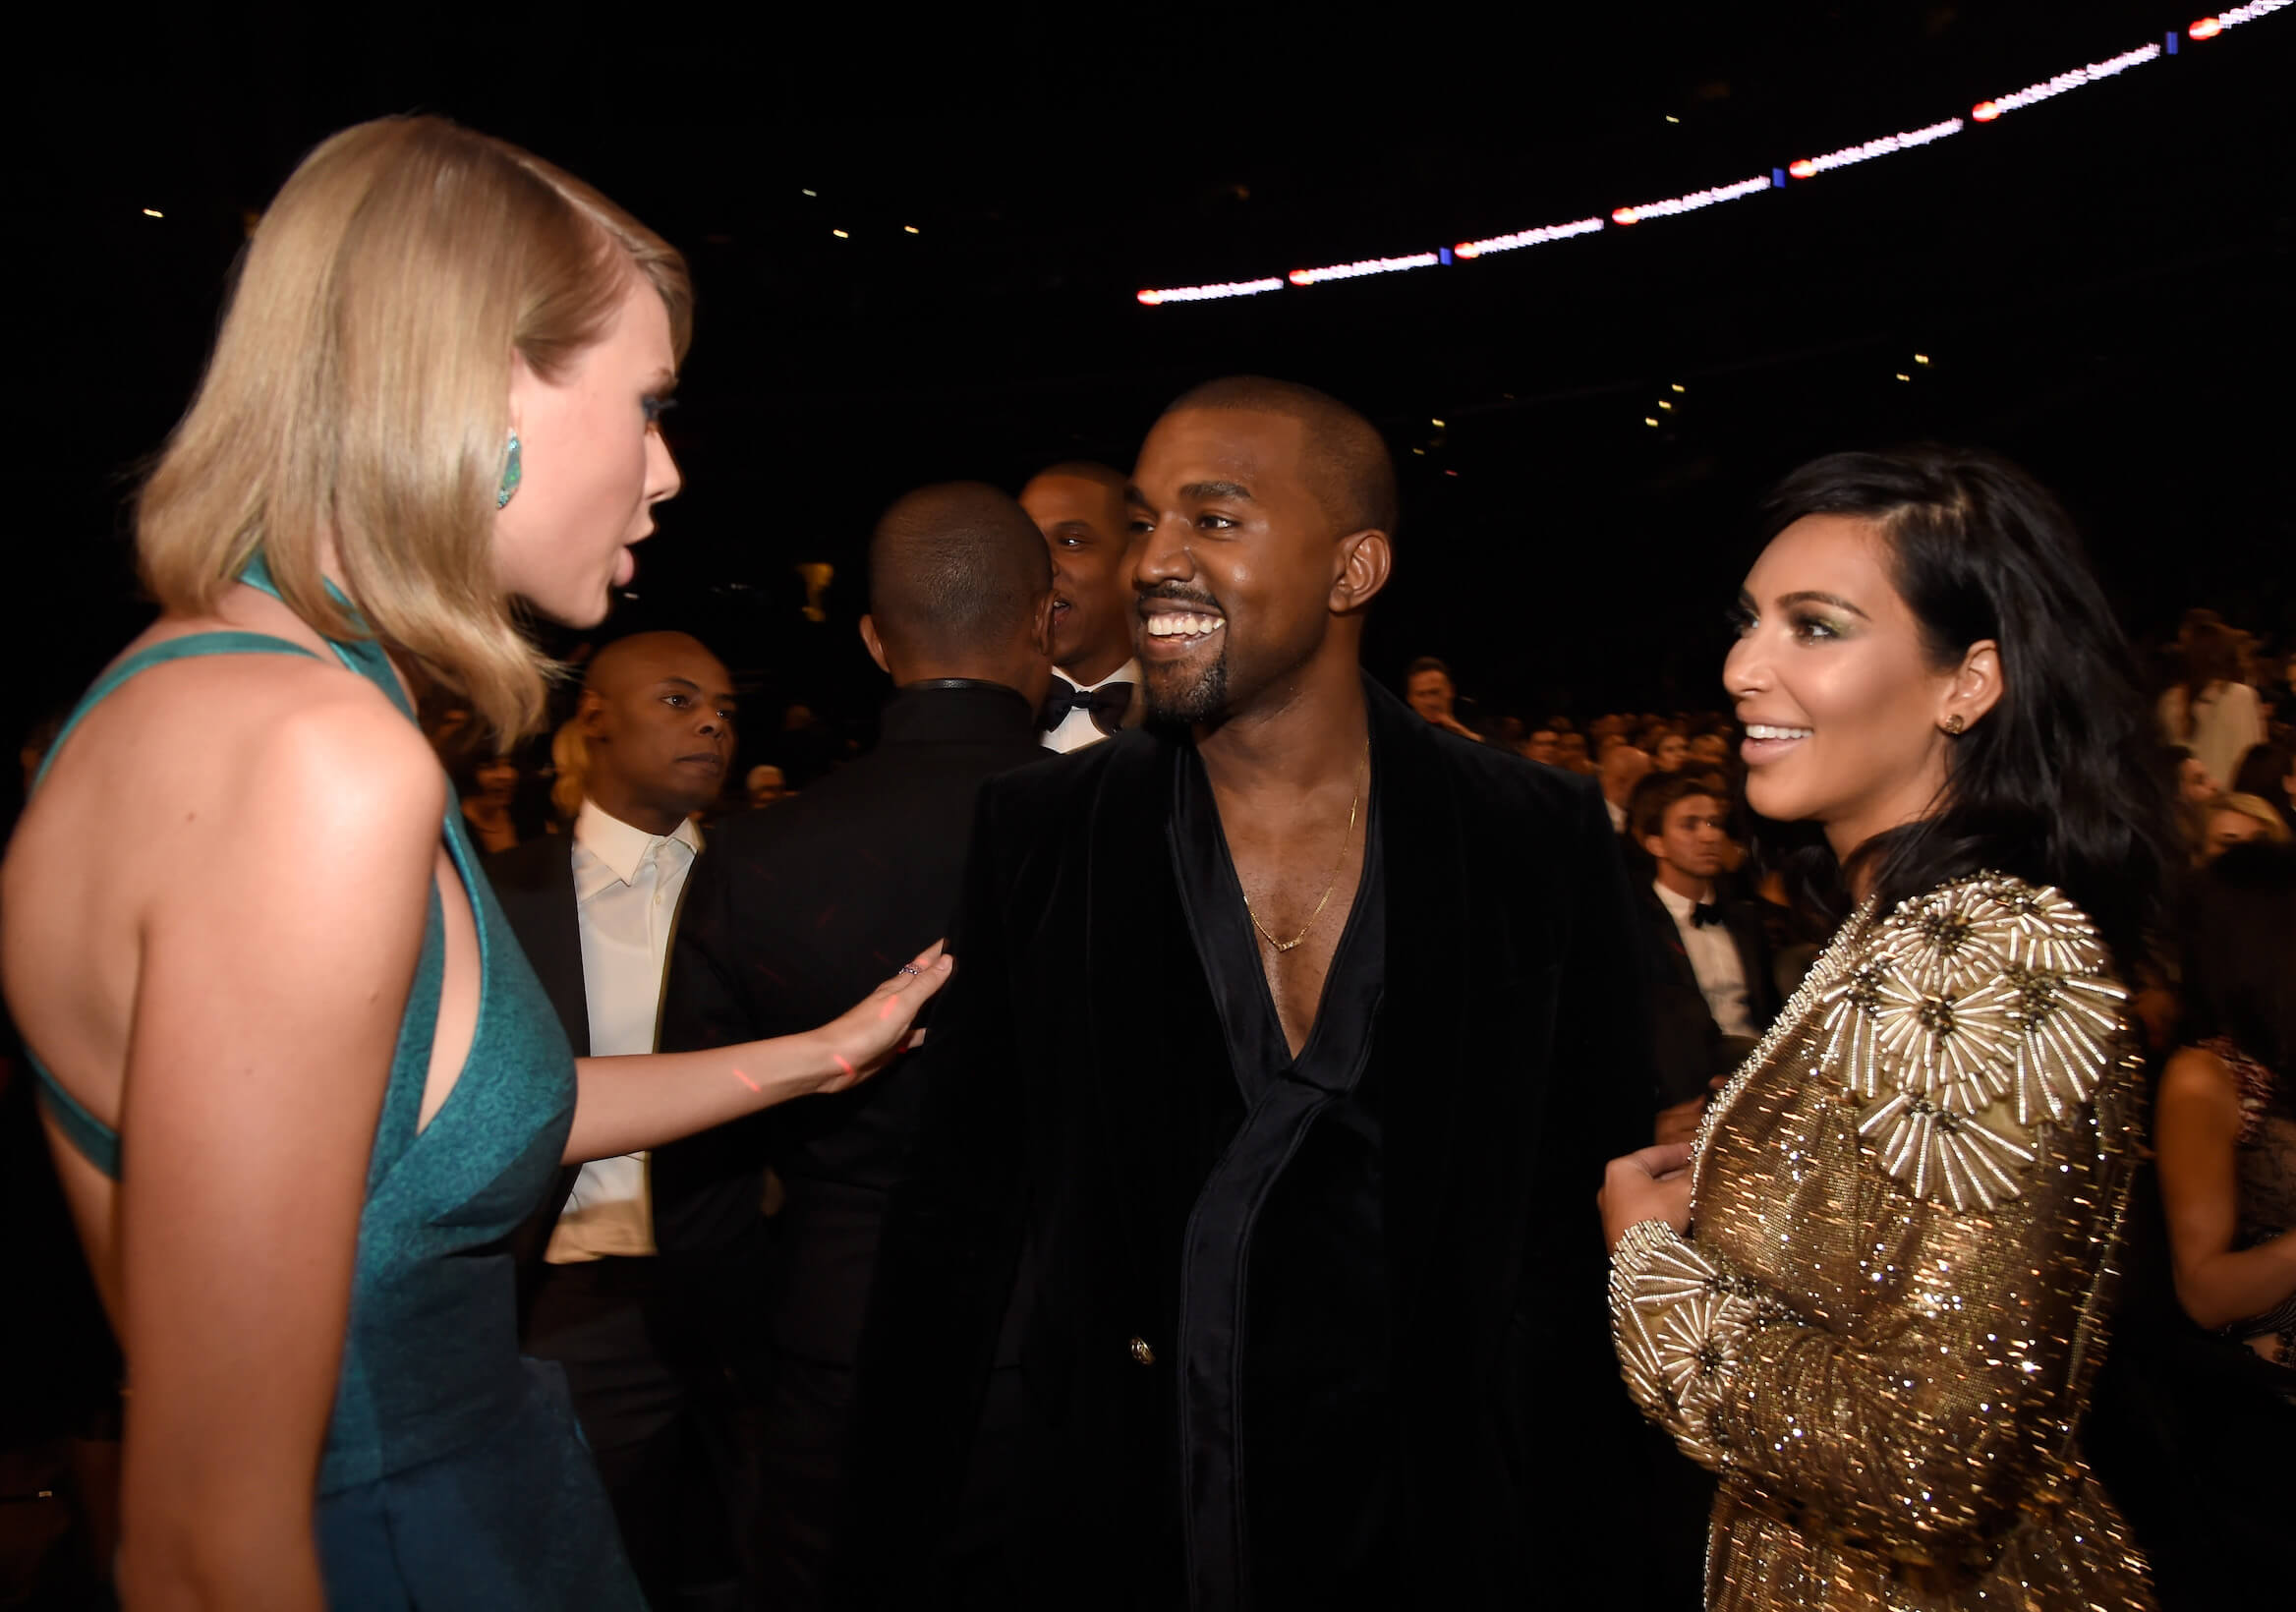 Taylor Swift speaking to Kanye West and Kim Kardashian at the Grammy Awards in 2015